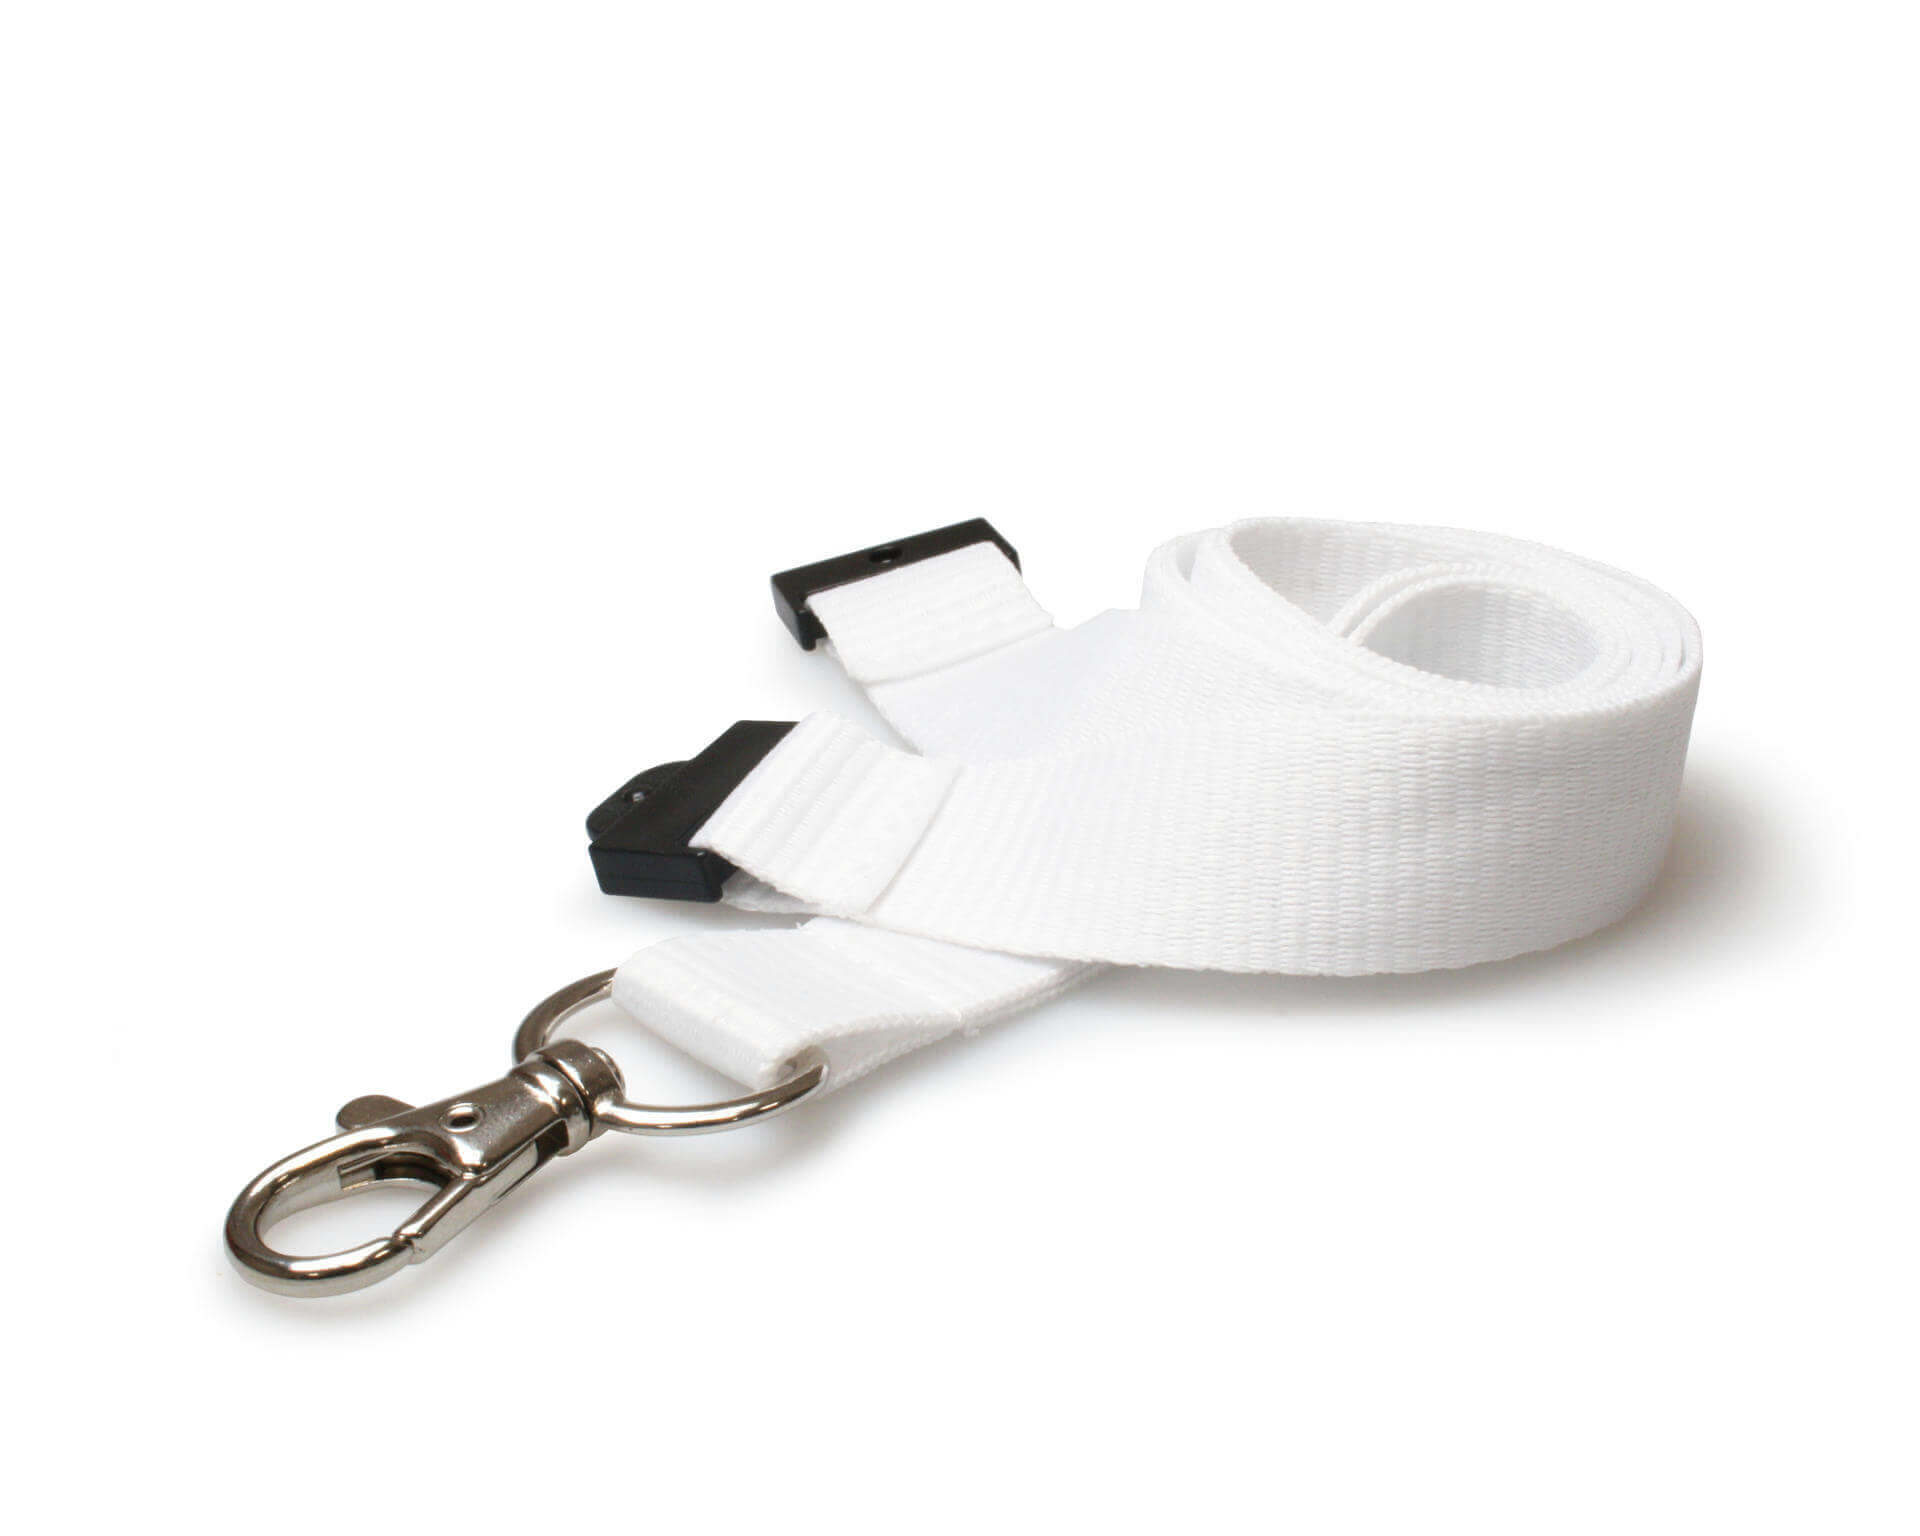 20mm White Lanyards (100 Pack) - Trigger Clip and Safety Breakaway